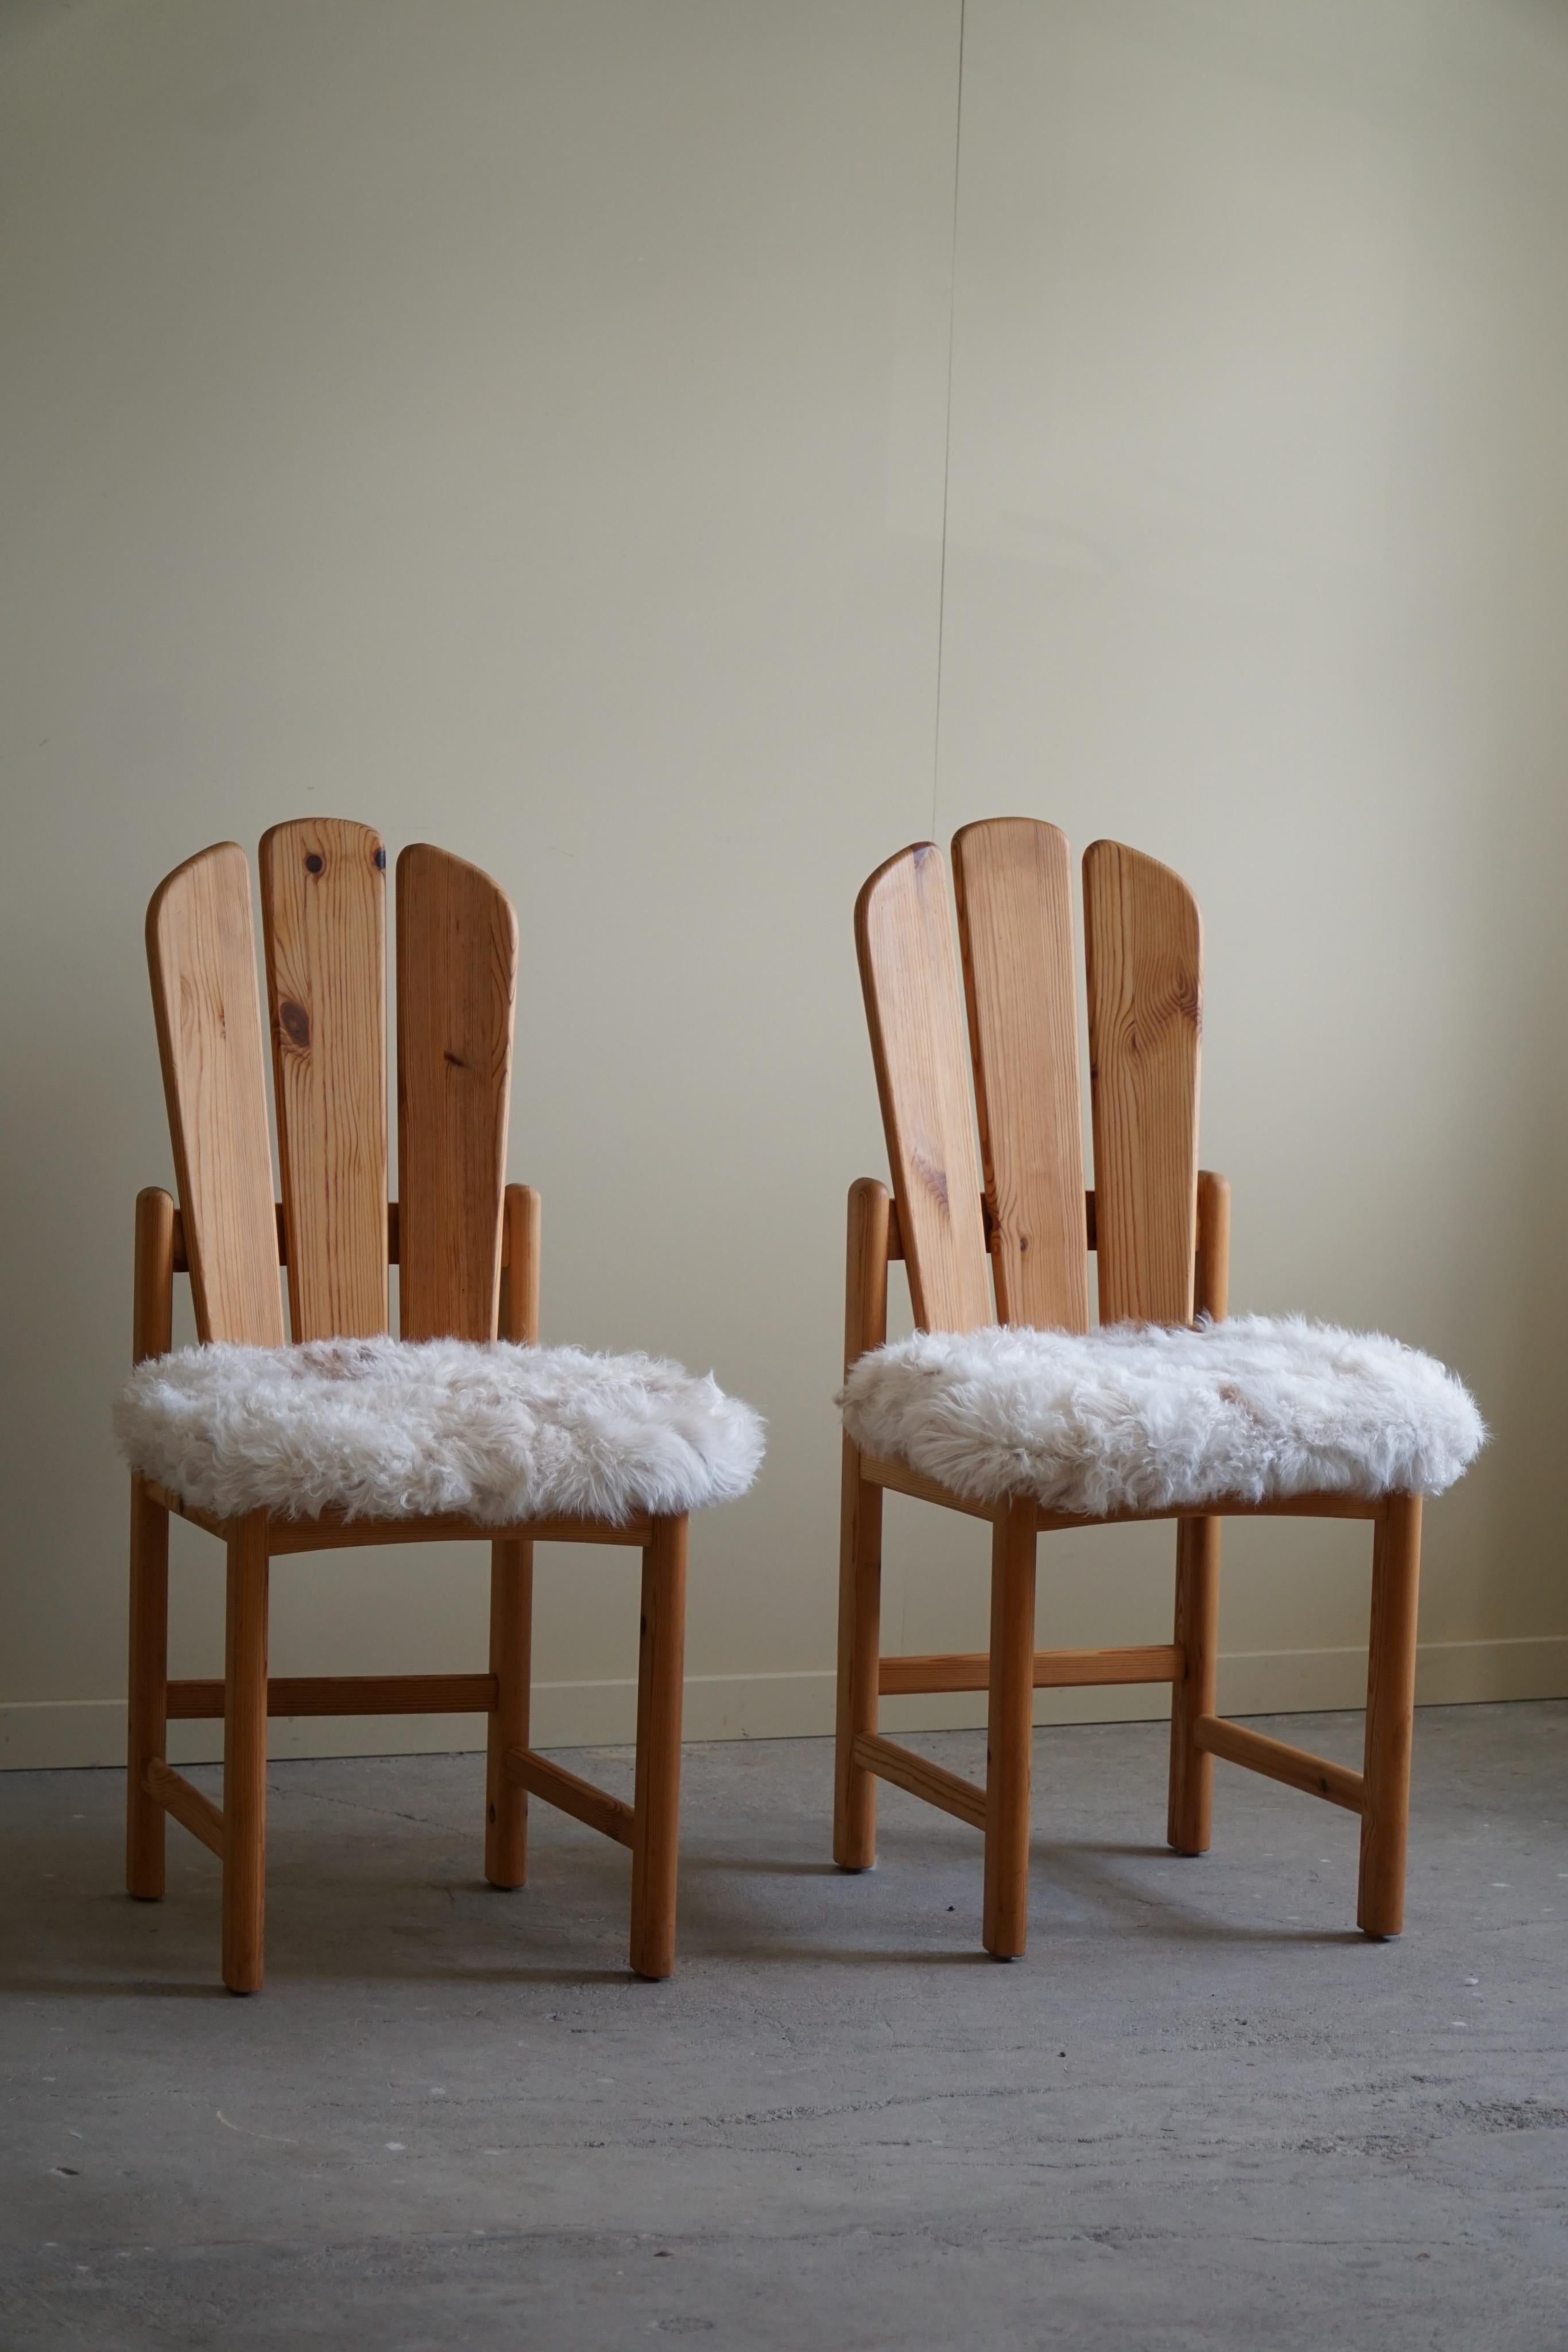 Pair of 2 Sculptural Danish Modern Brutalist Dining Chairs in Solid Pine, 1970s For Sale 4